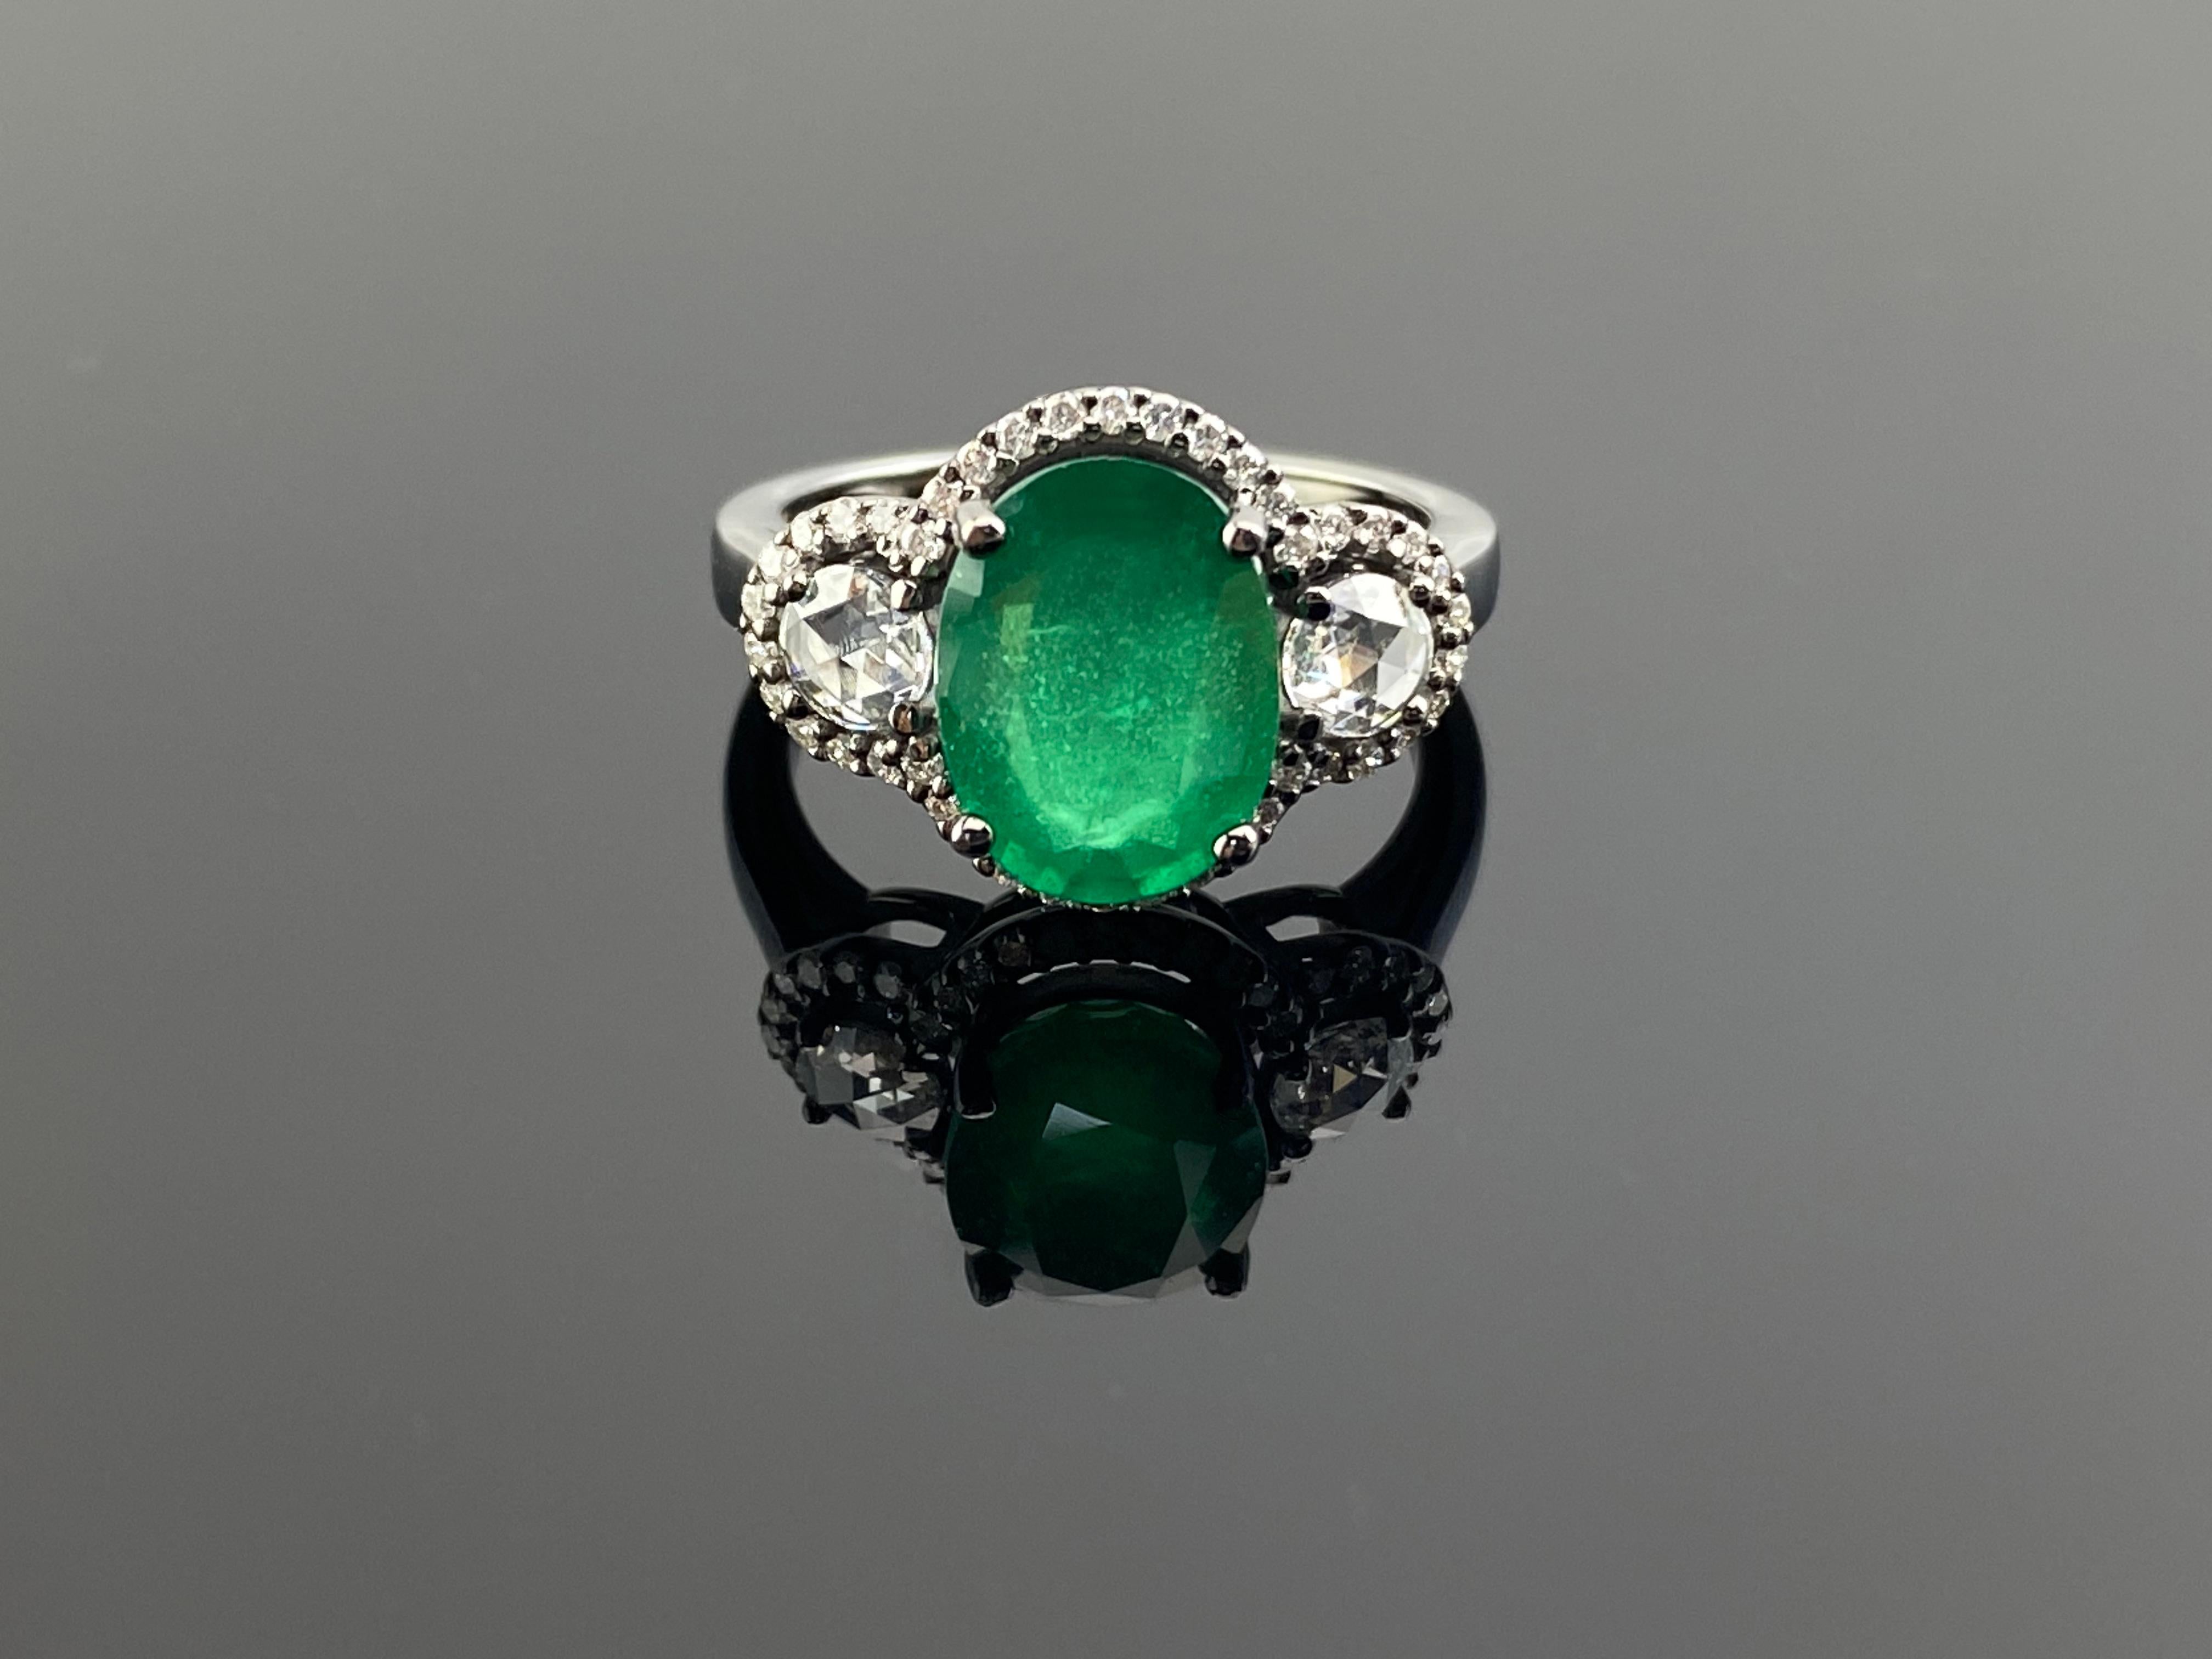 Art Deco Style 3.01 Ctw Fine Quality Oval Zambian Emerald & Rosecut Diamond  French Pave Ring in 18k Rhodium polished Gold

Add the influence of the Art Deco Era to your fine jewelry collection with this one-of-a-kind 18k gold ring, reimagined for